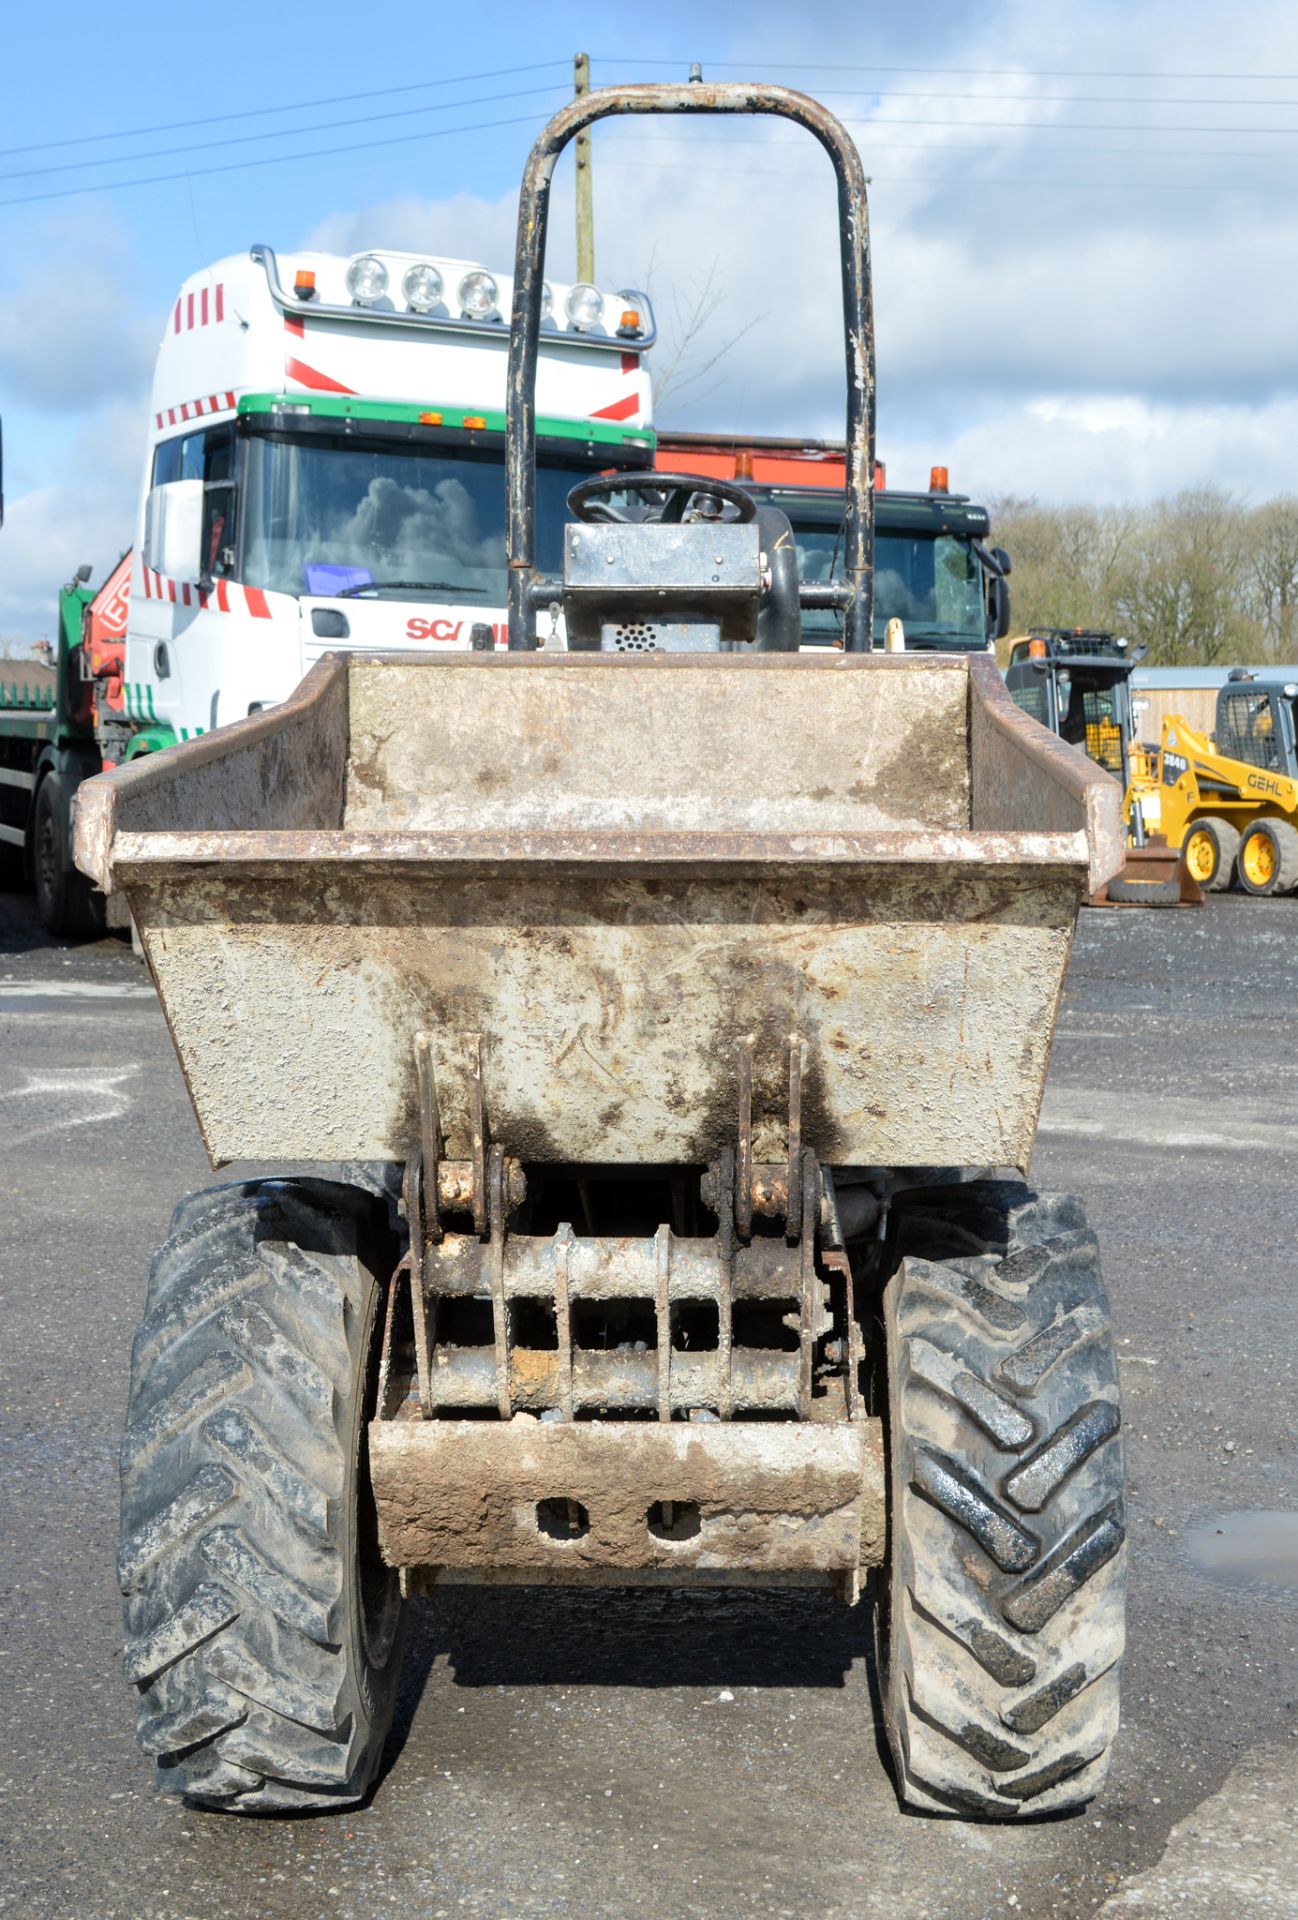 Benford Terex HD 1000 high tip dumper Year: 2007 S/N: E703FT231 Recorded Hours: 2184 - Image 5 of 7